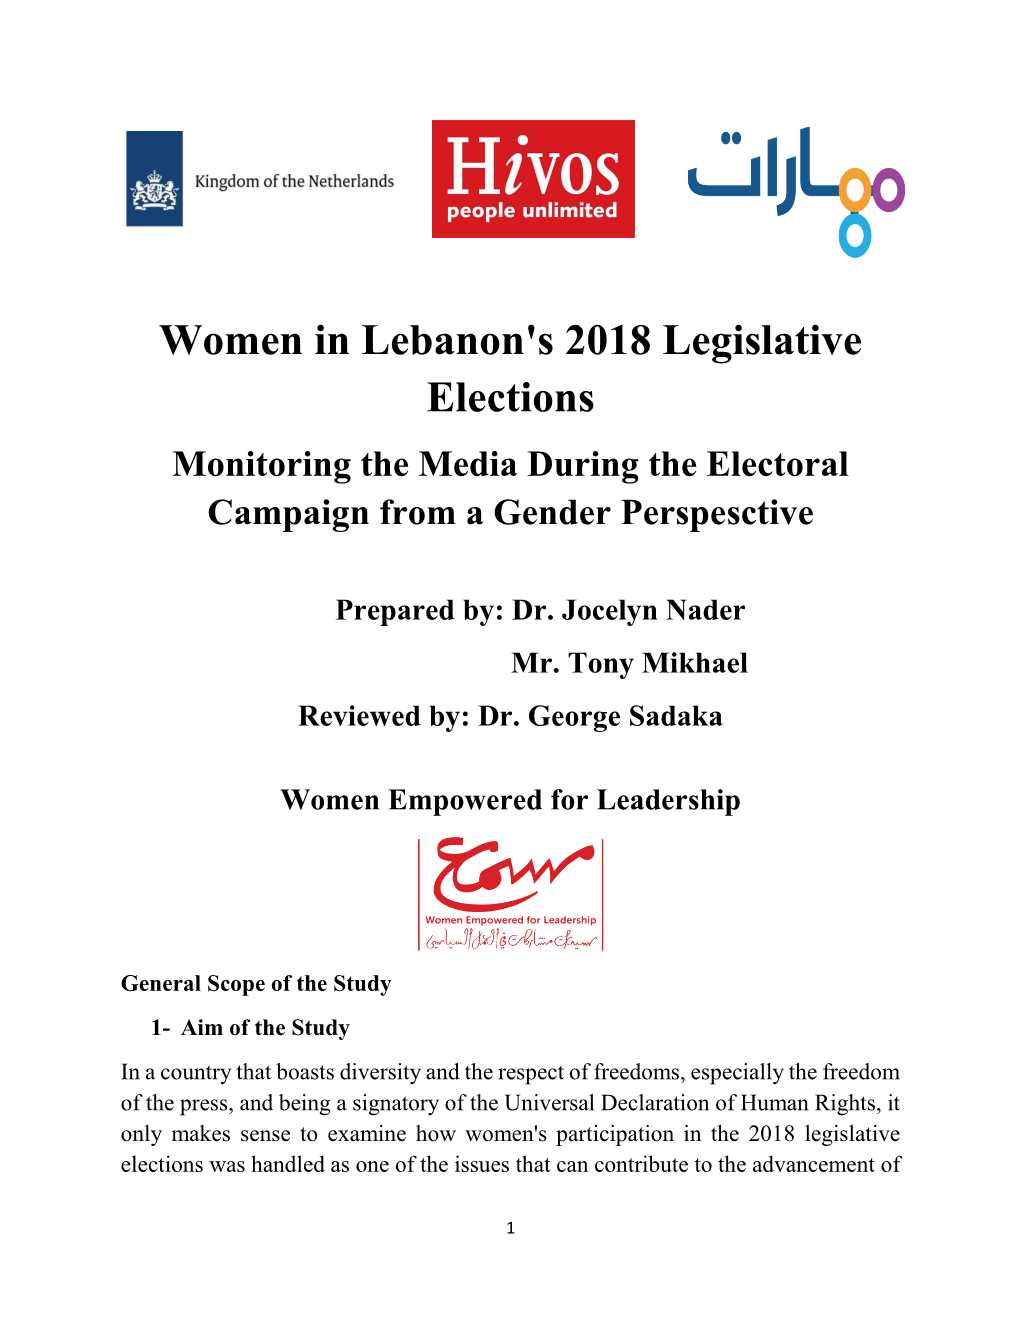 Women in Lebanon's 2018 Legislative Elections Monitoring the Media During the Electoral Campaign from a Gender Perspesctive